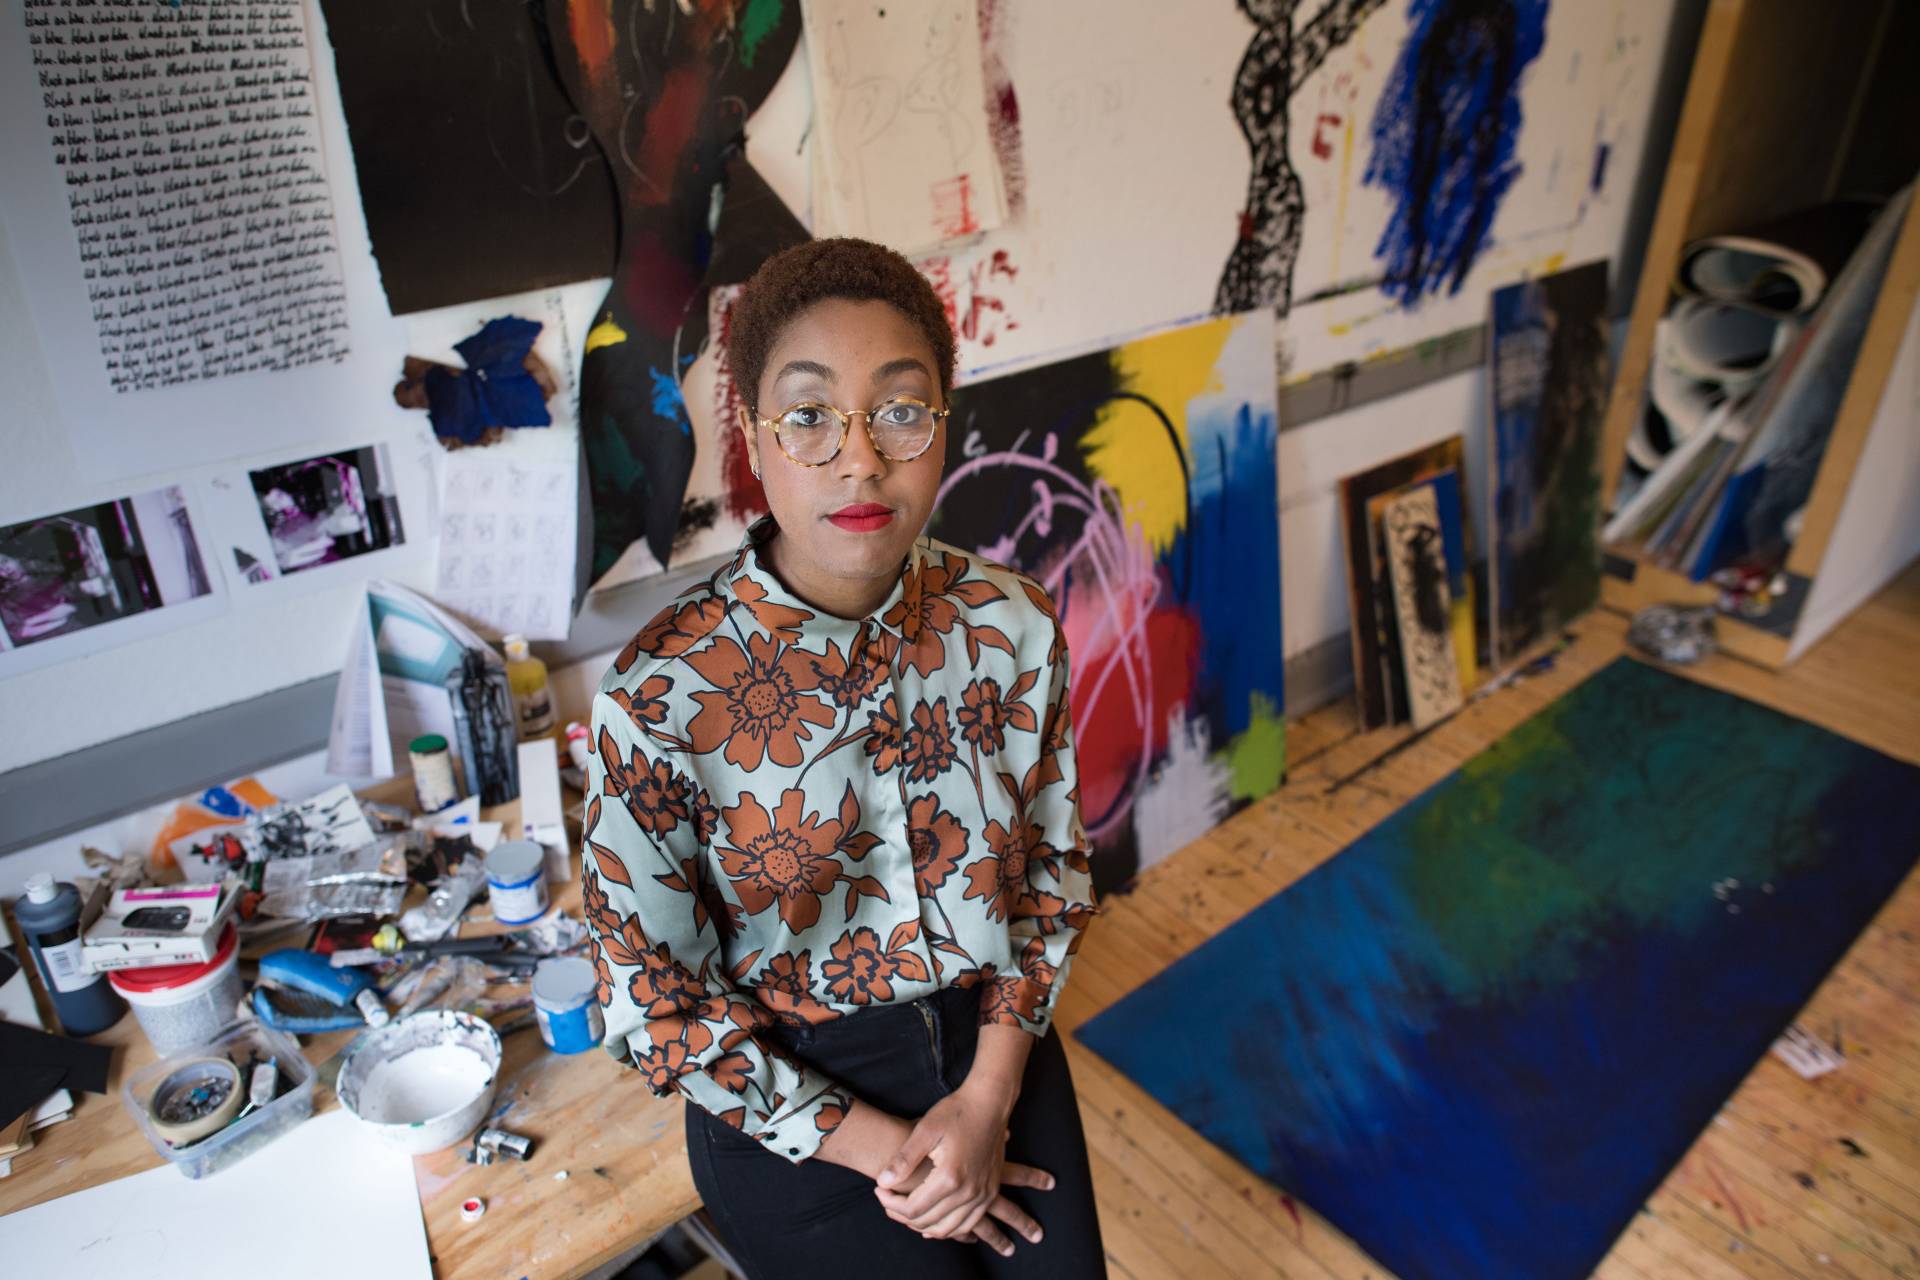 Imani Ford in front of her paintings and artwork